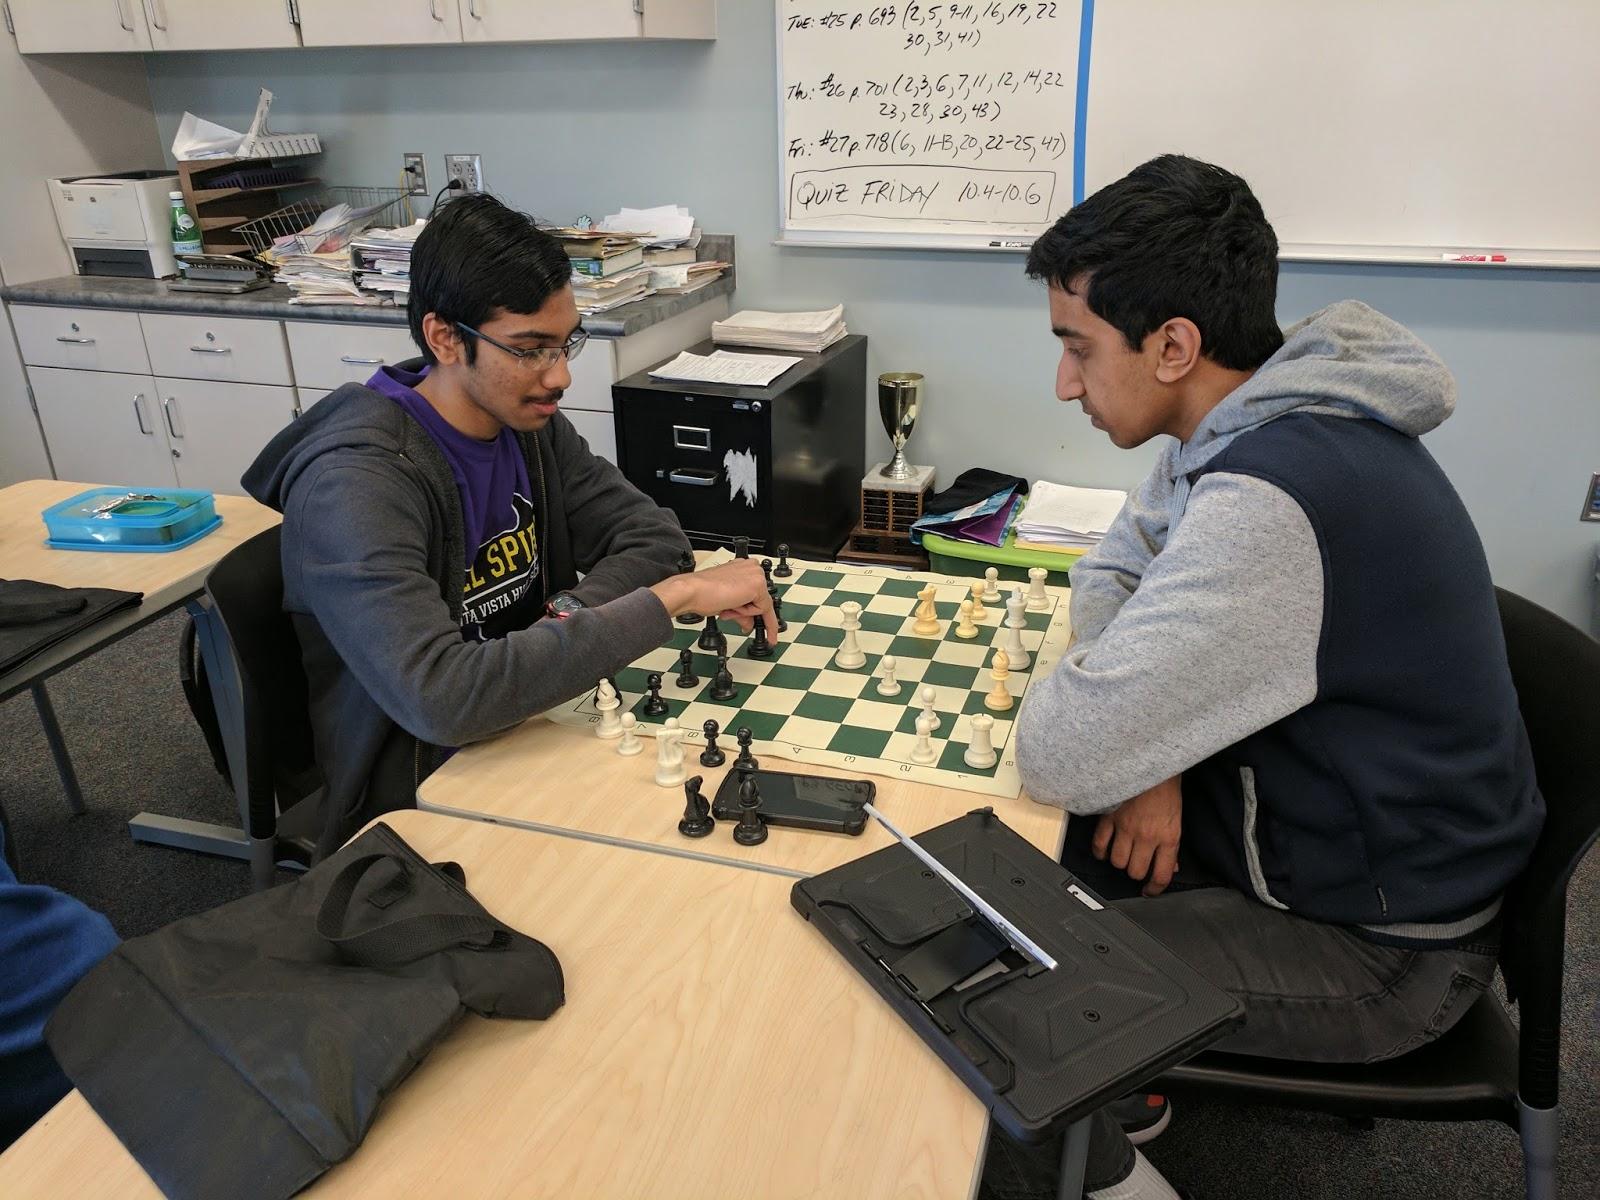 Sophomore Samyak Karnavat (left) and Senior Kesav Viswanadha (right) play a friendly game of chess at lunch while discussing strategy. Practice was a vital part of keeping one’s mind sharp and flexible for future games.